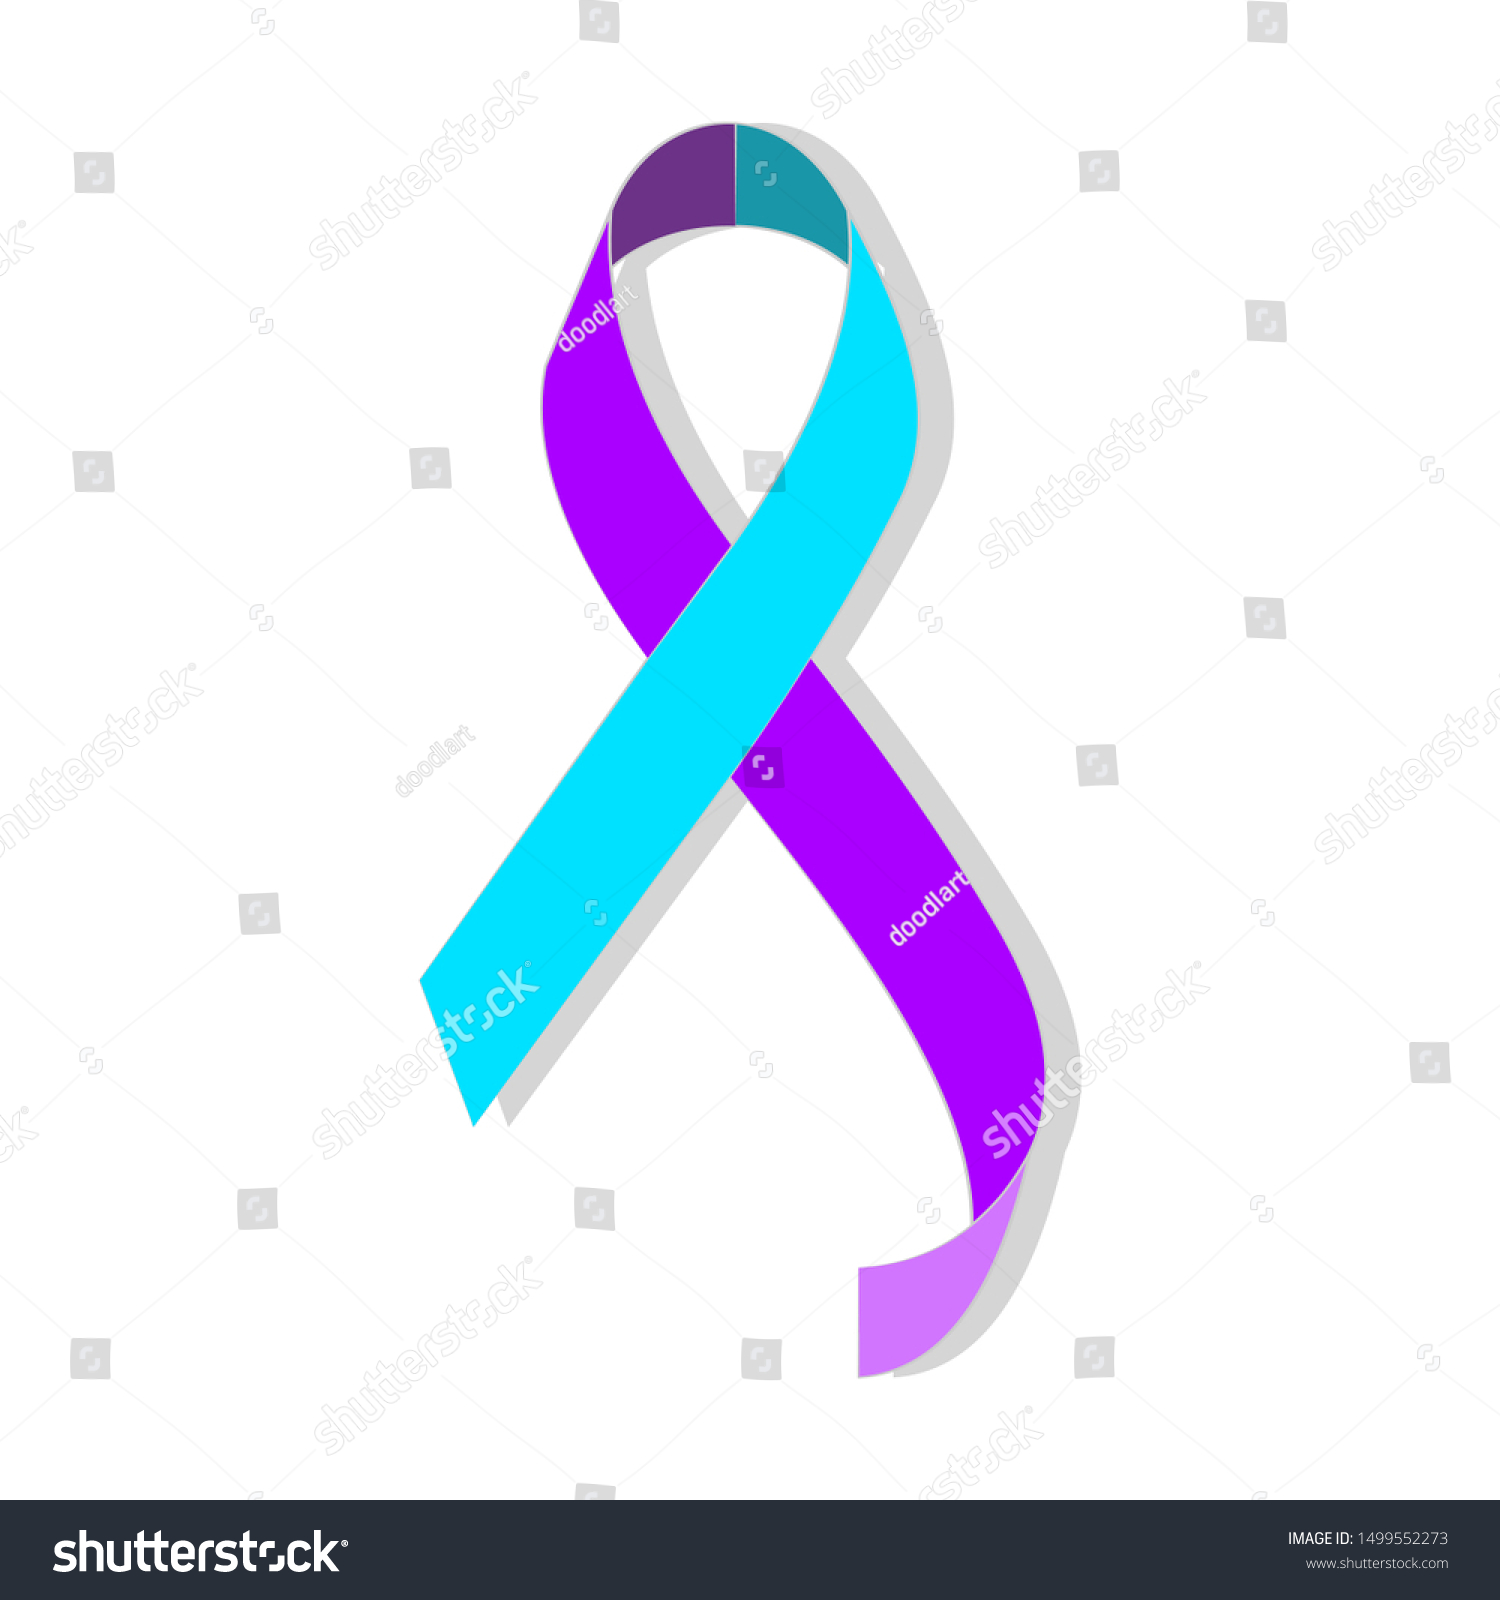 Teal Purple Prevention Awareness Stock Vector (Royalty 1499552273